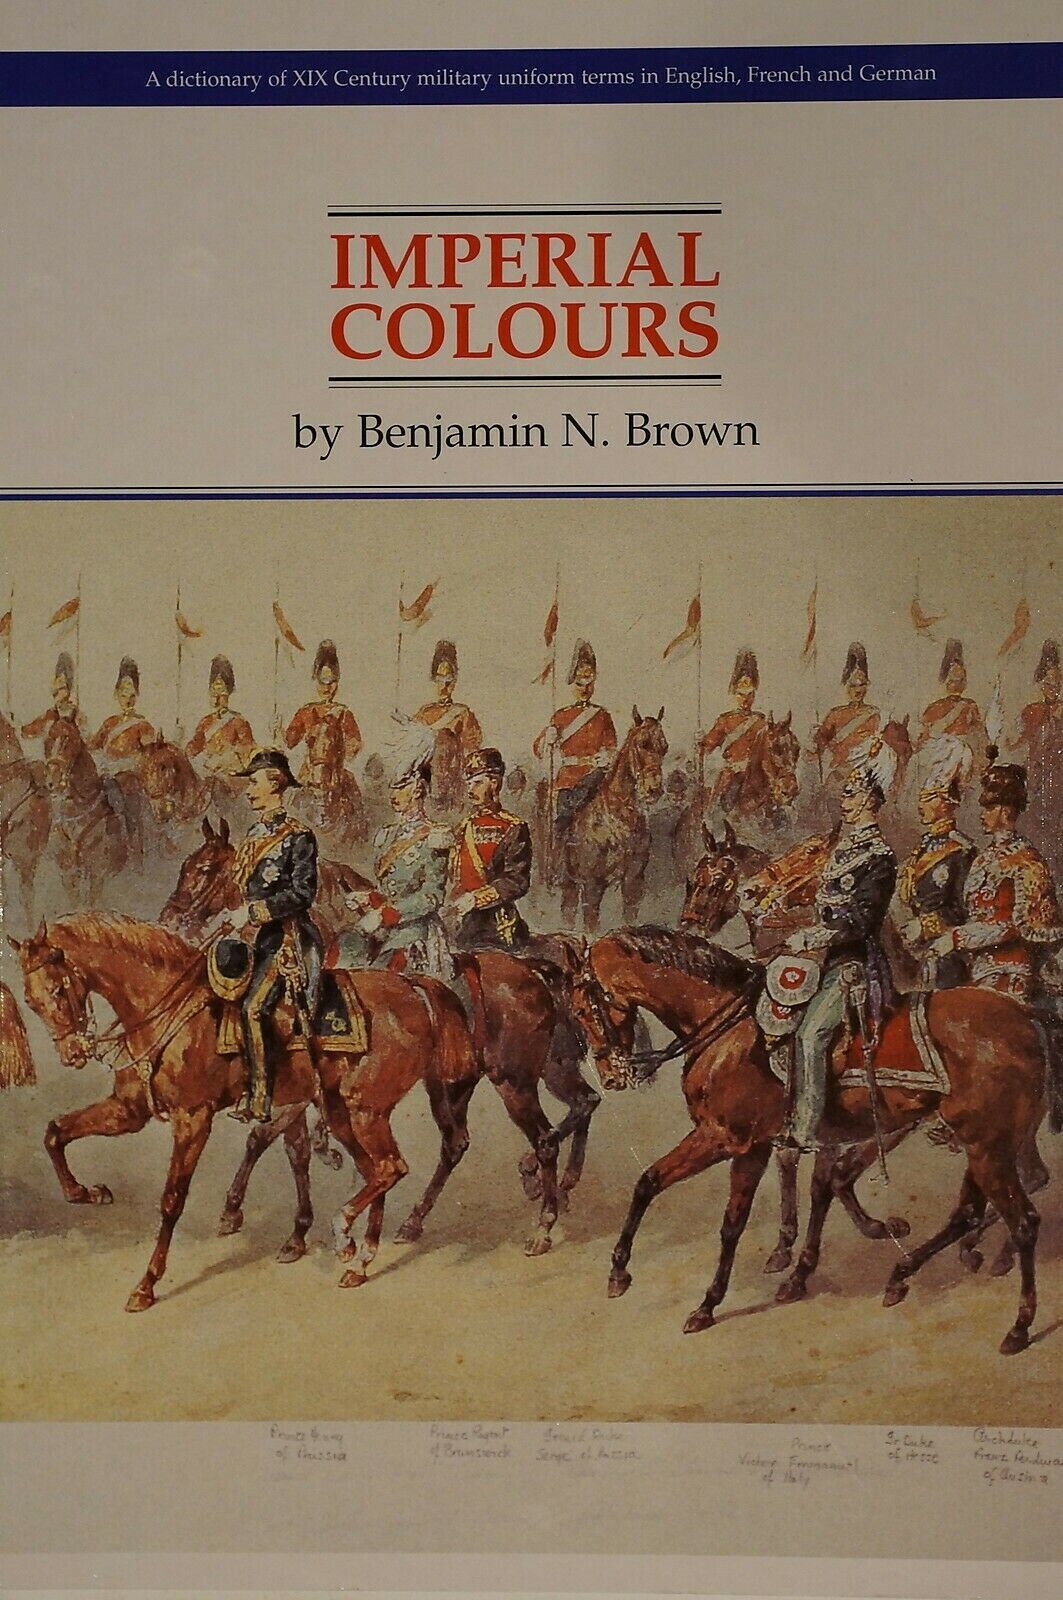 British French German Imperial Colours XIX Century Uniform Terms Reference Book